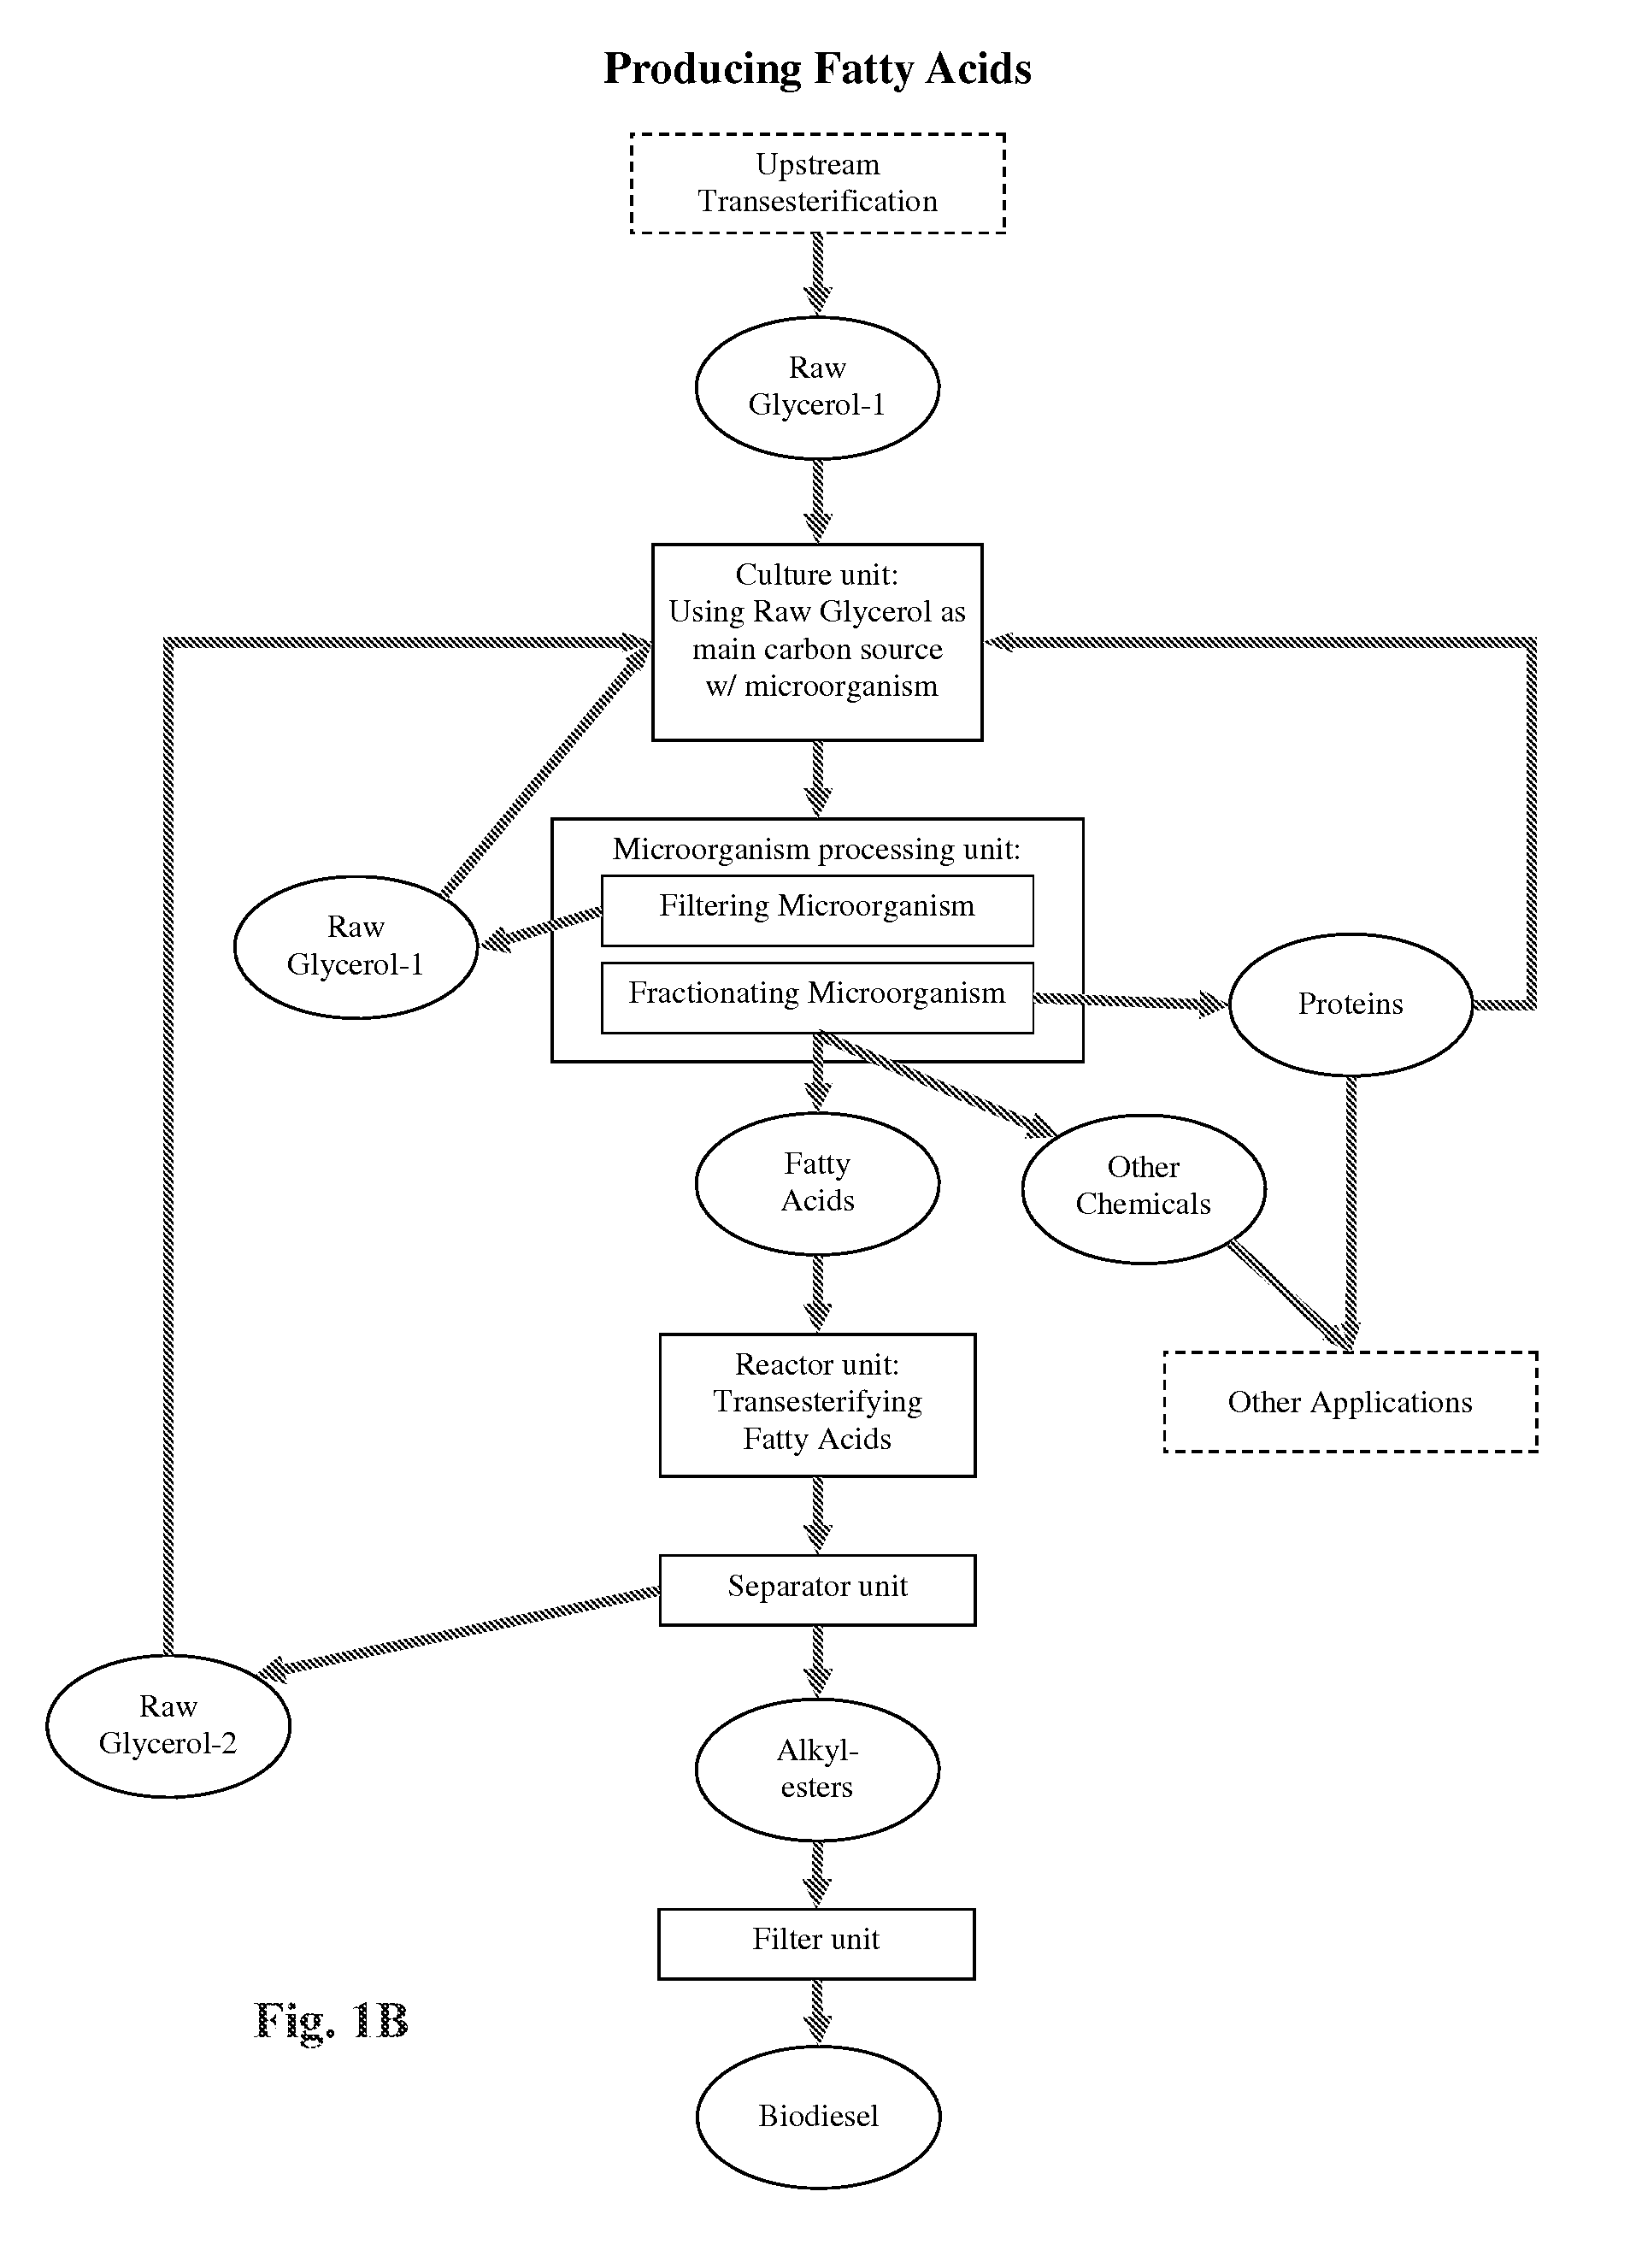 Method of producing fatty acids for biofuel, biodiesel, and other valuable chemicals